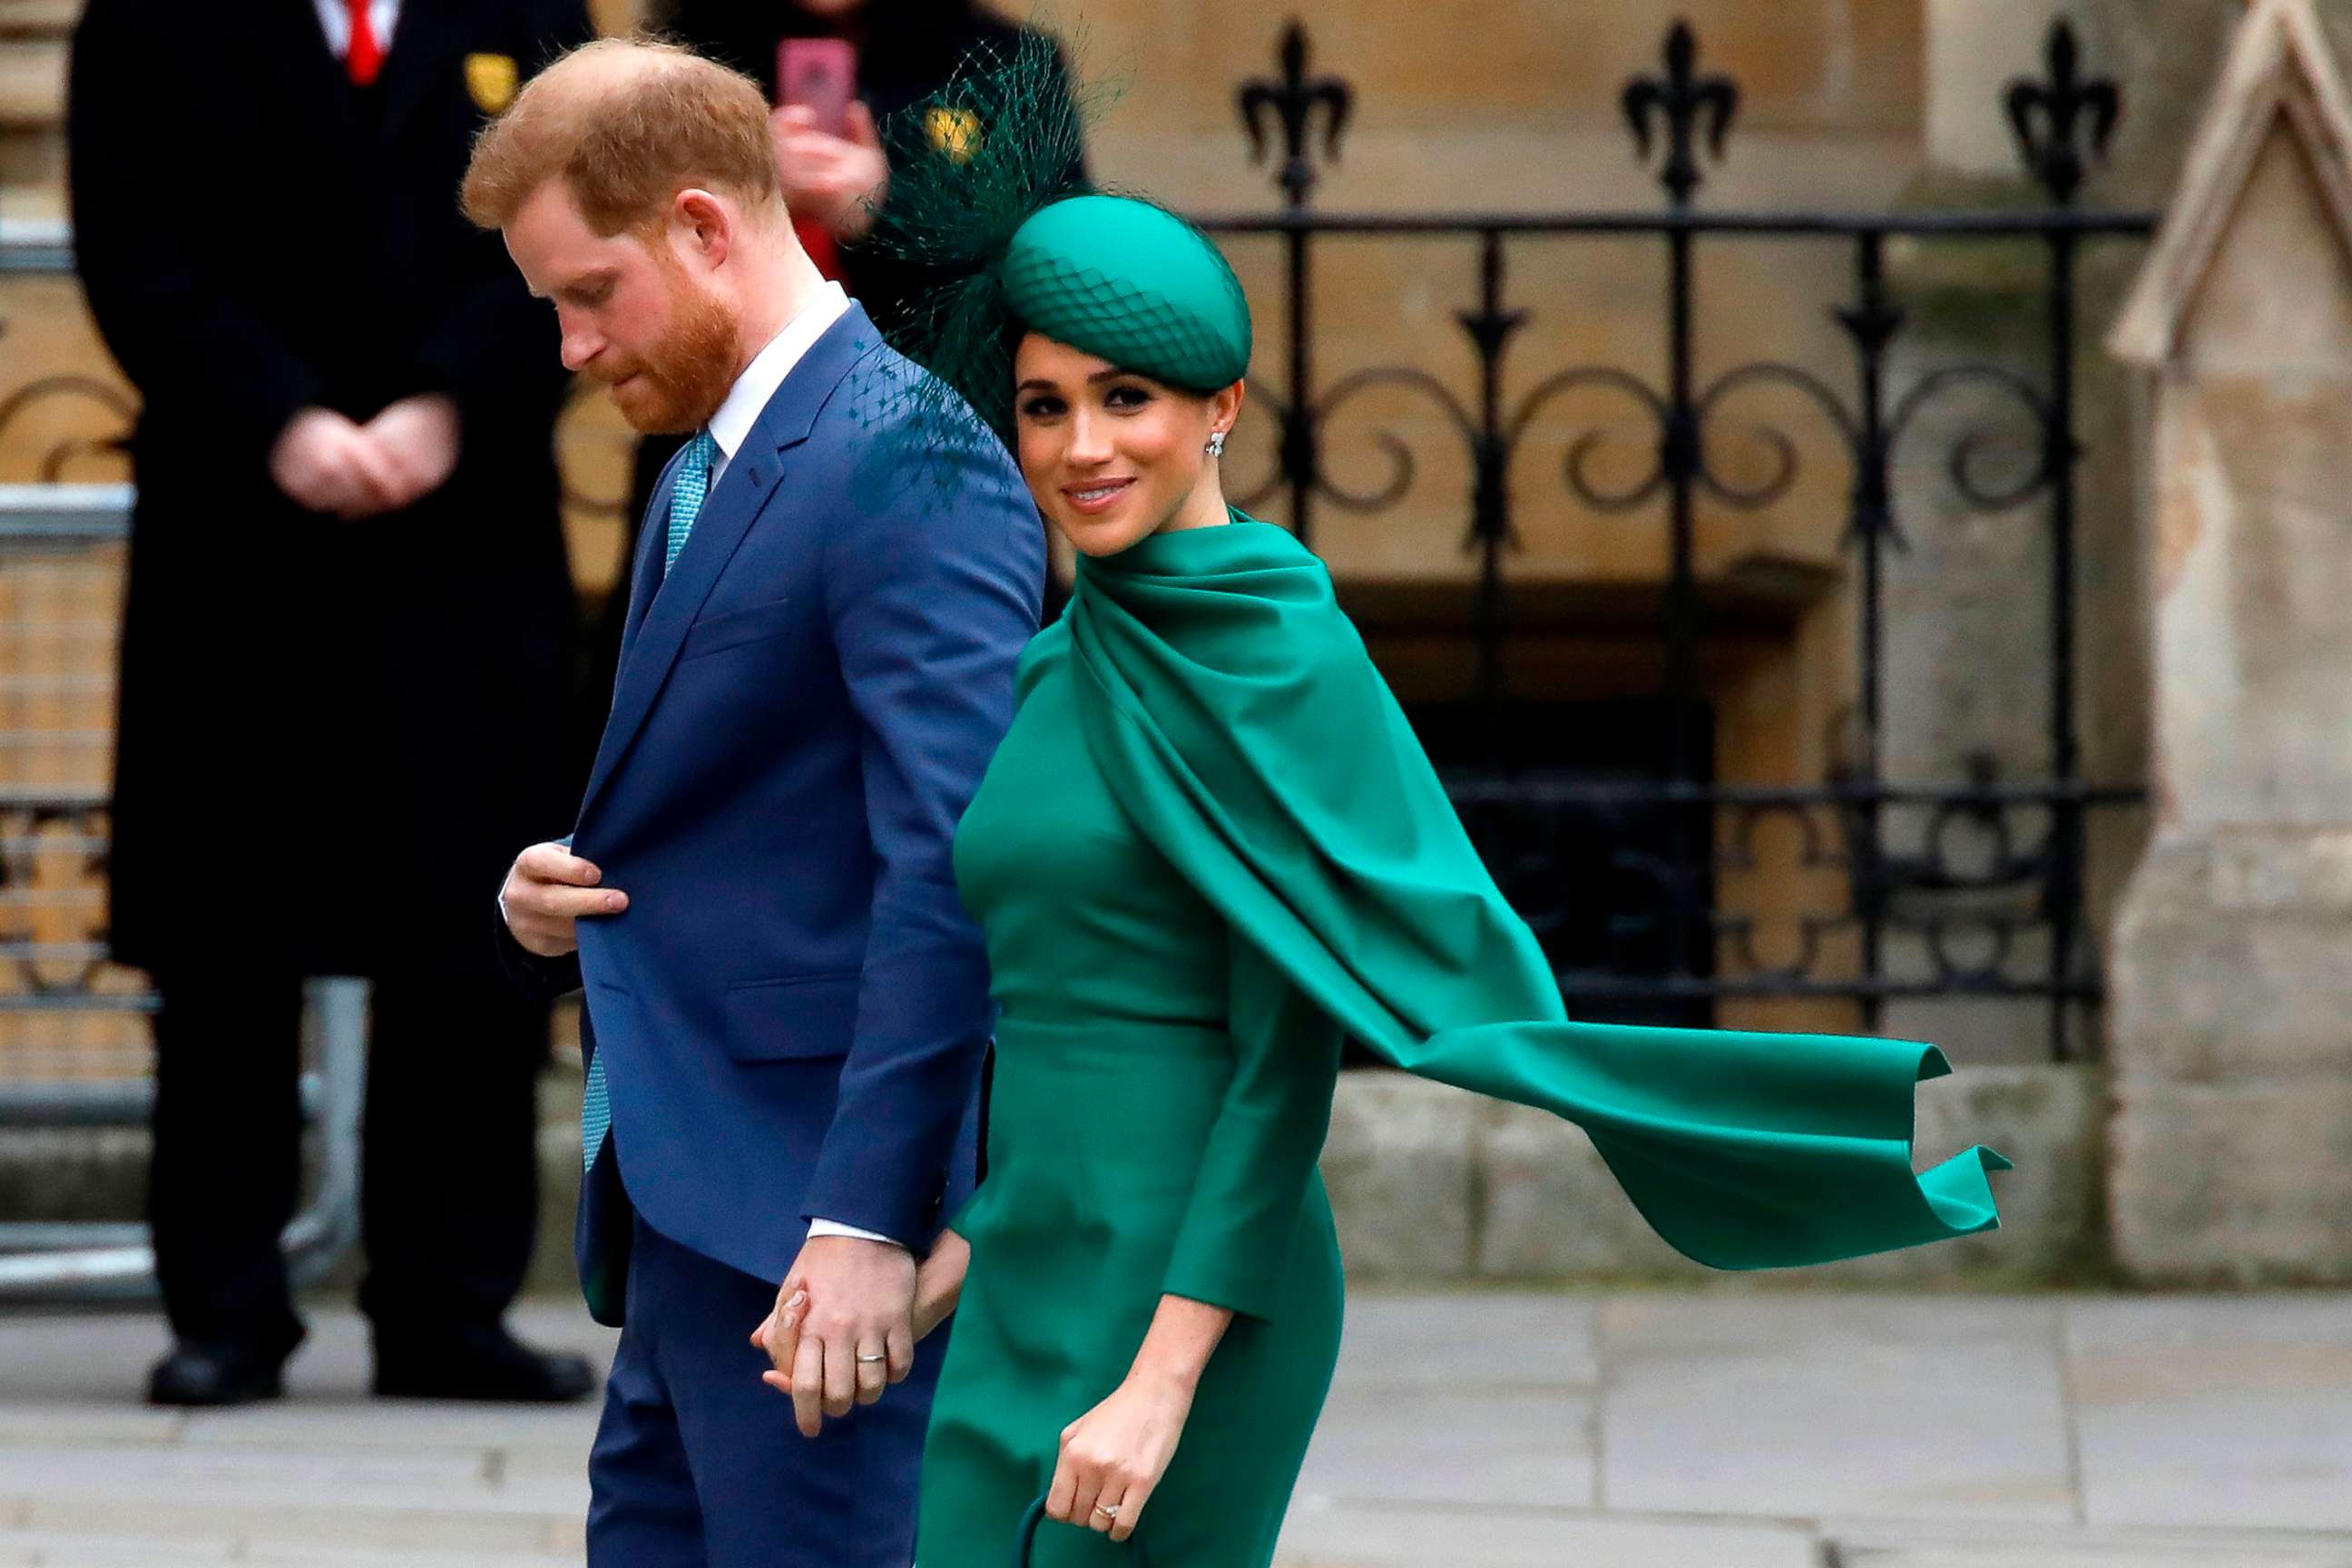 PHOTO: Britain's Prince Harry, Duke of Sussex and Meghan, Duchess of Sussex arrive to attend the annual Commonwealth Service at Westminster Abbey in London on March 9, 2020.